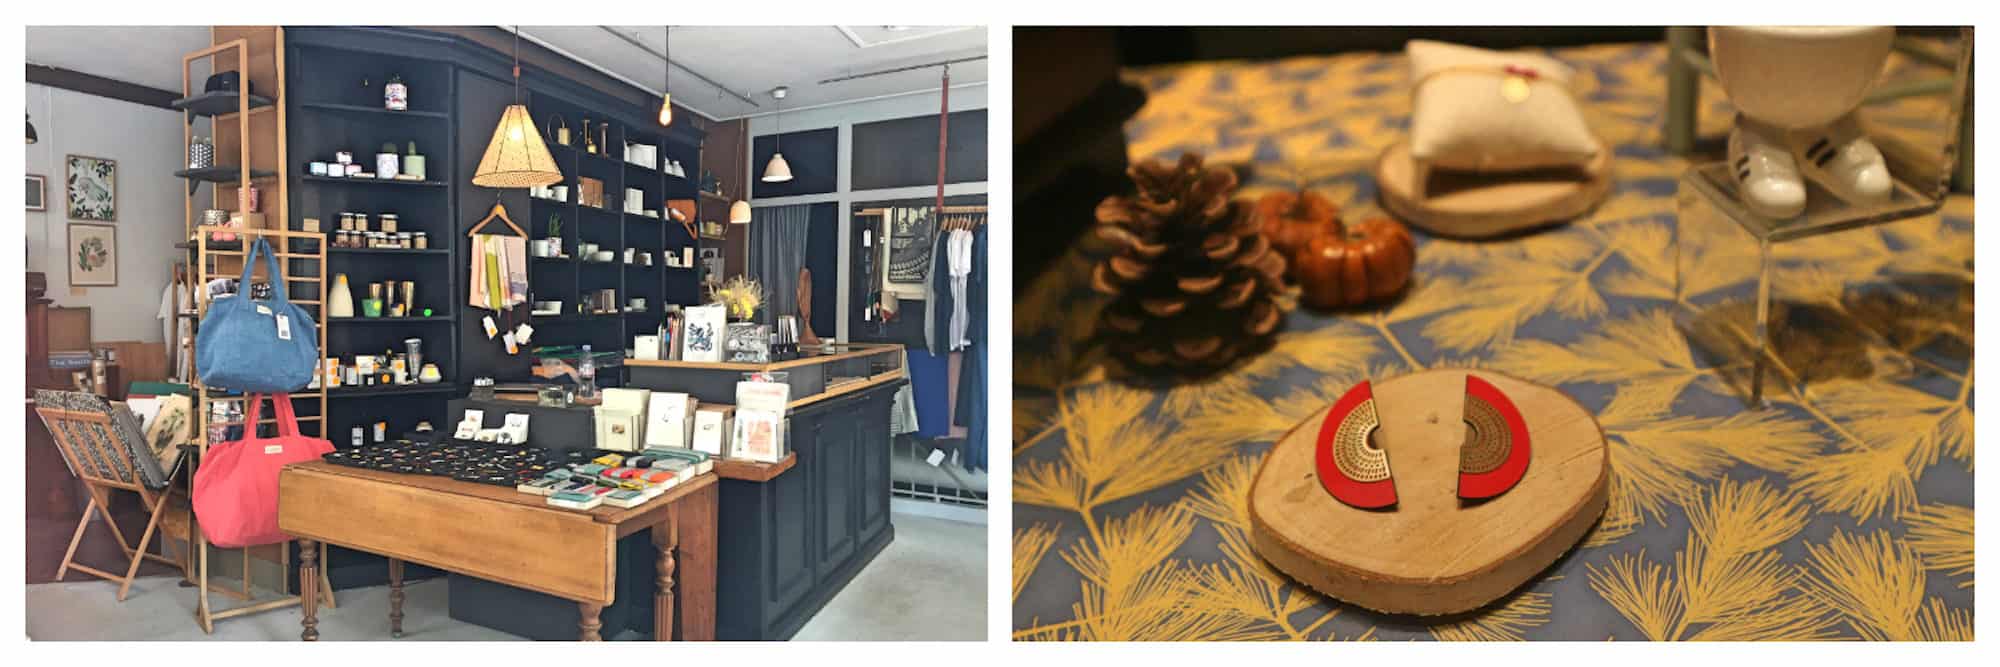 Places to go shopping in Paris in the Batignolles area include French Touche for its apparel and stationery (left) and L'Atelier Haut Perché for its handmade accessories (right).